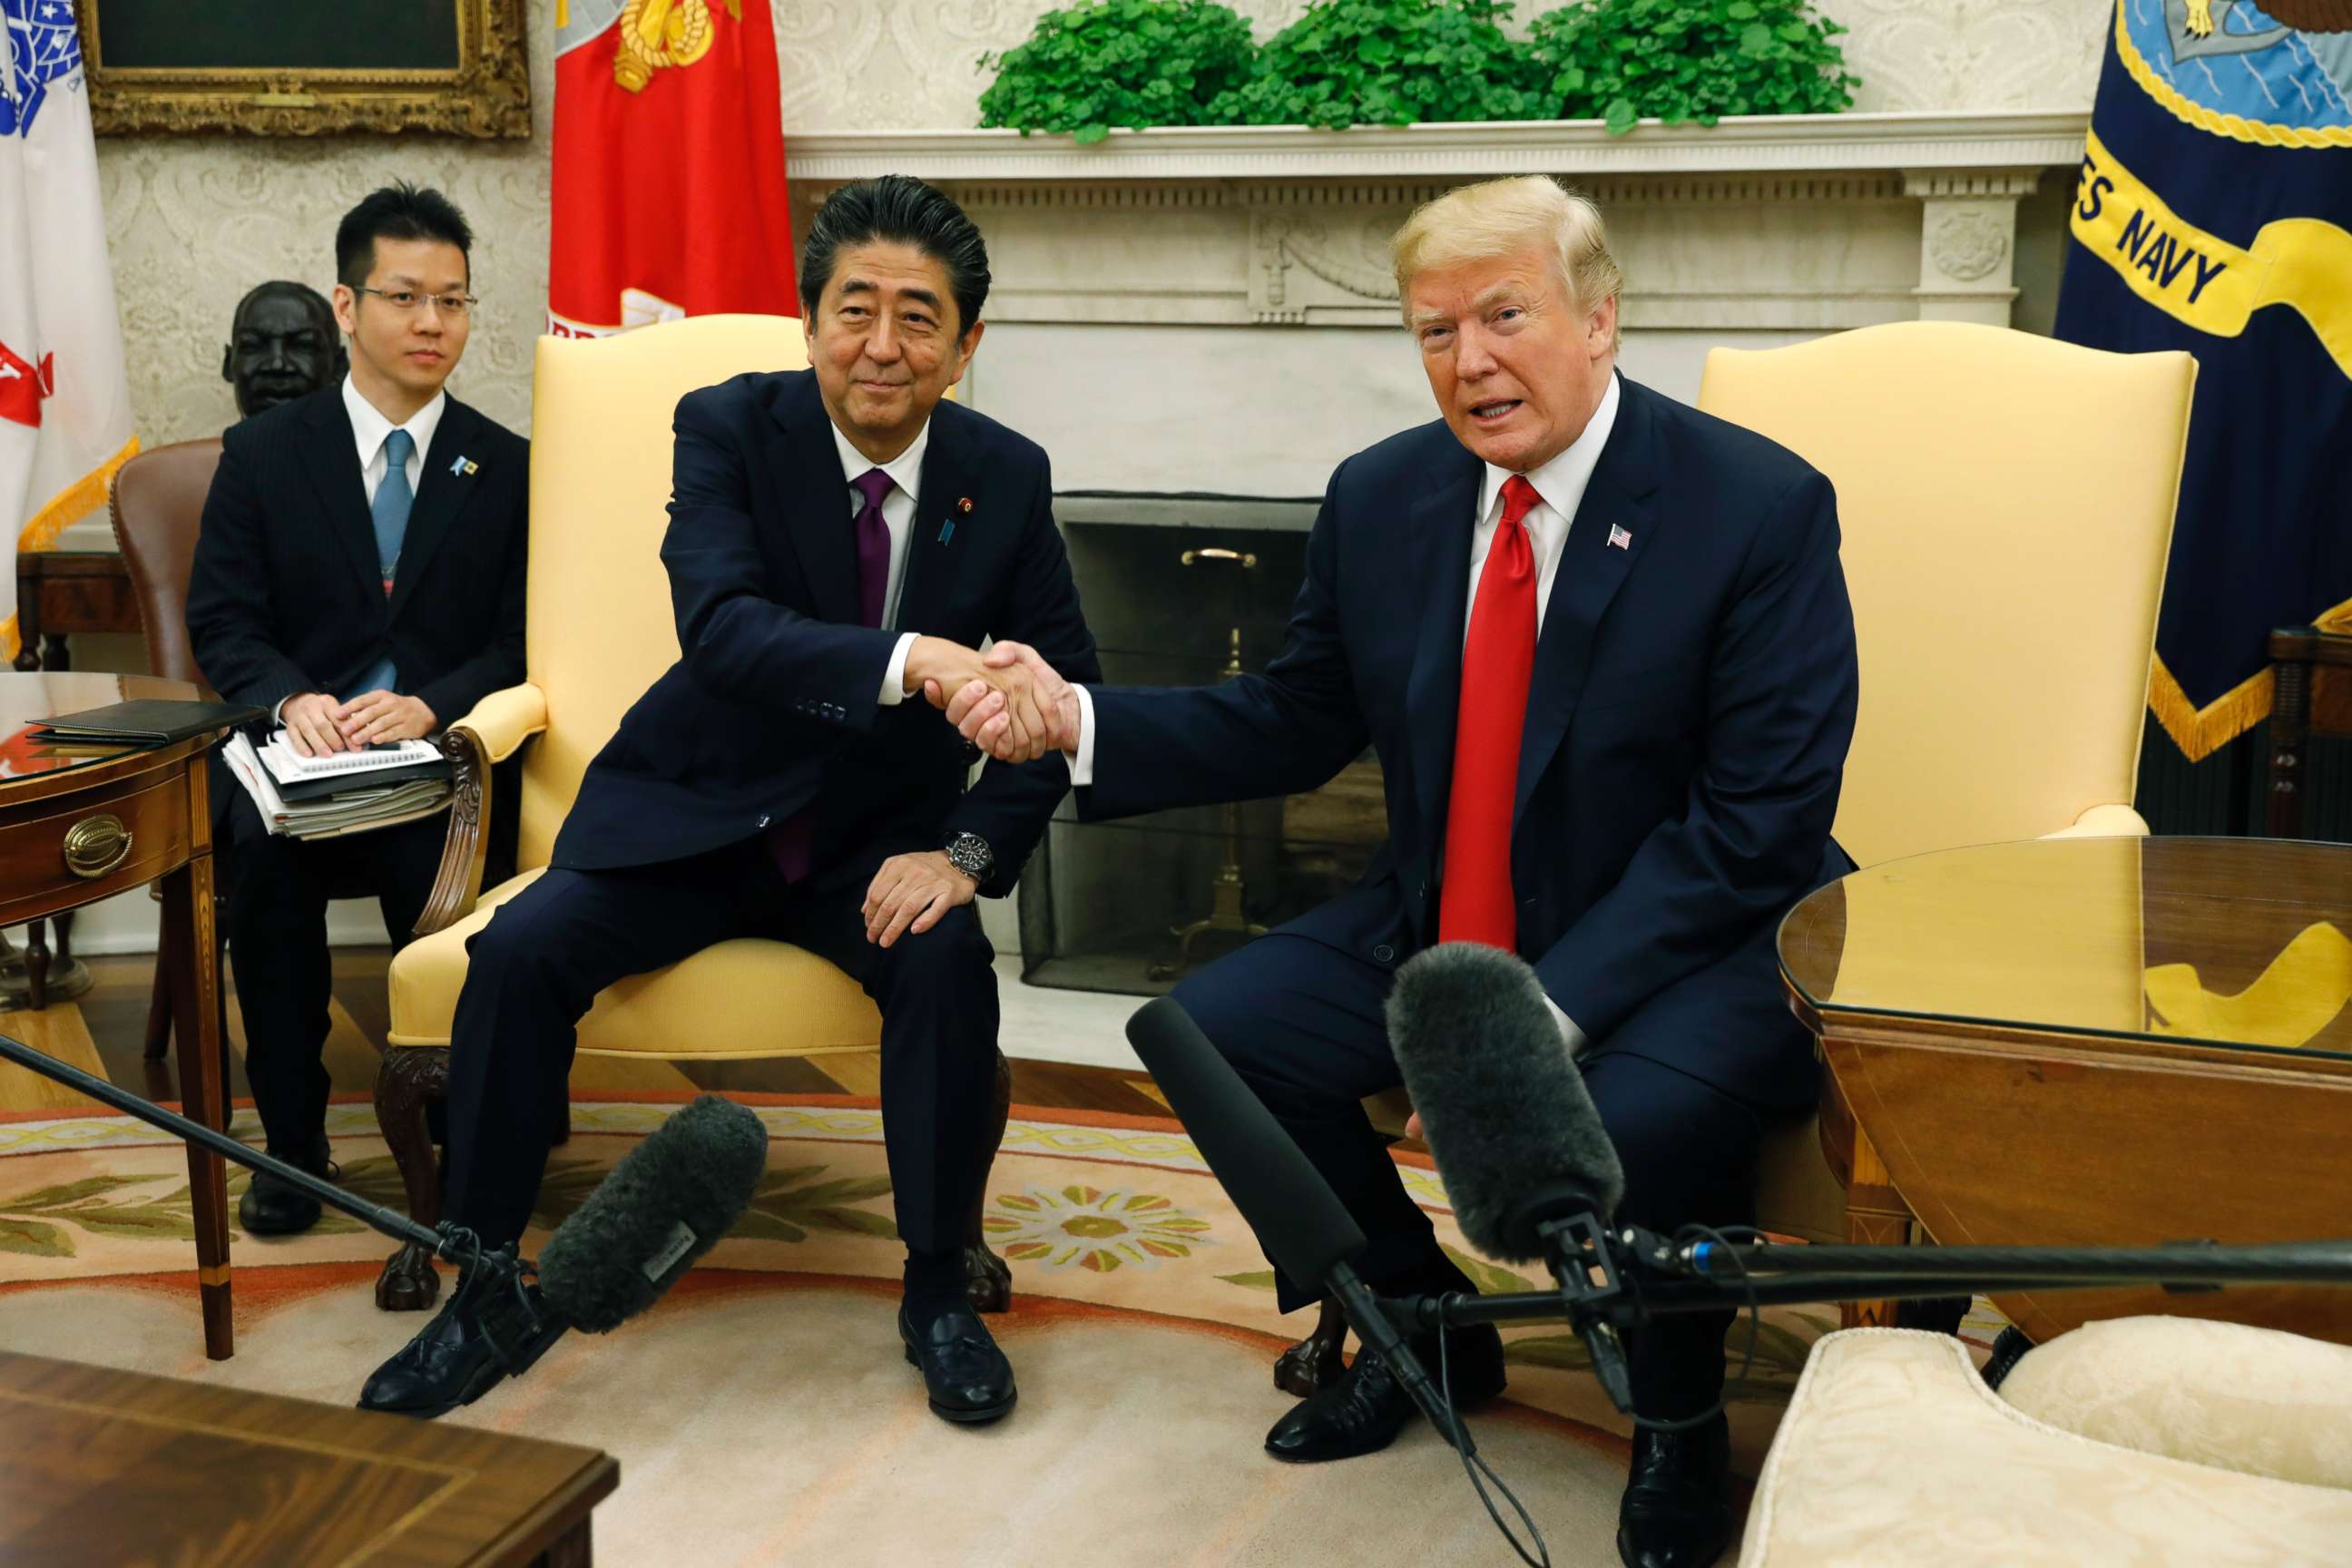 PHOTO: President Donald Trump meets with Japanese Prime Minister Shinzo Abe in the Oval Office of the White House, June 7, 2018, in Washington, DC.